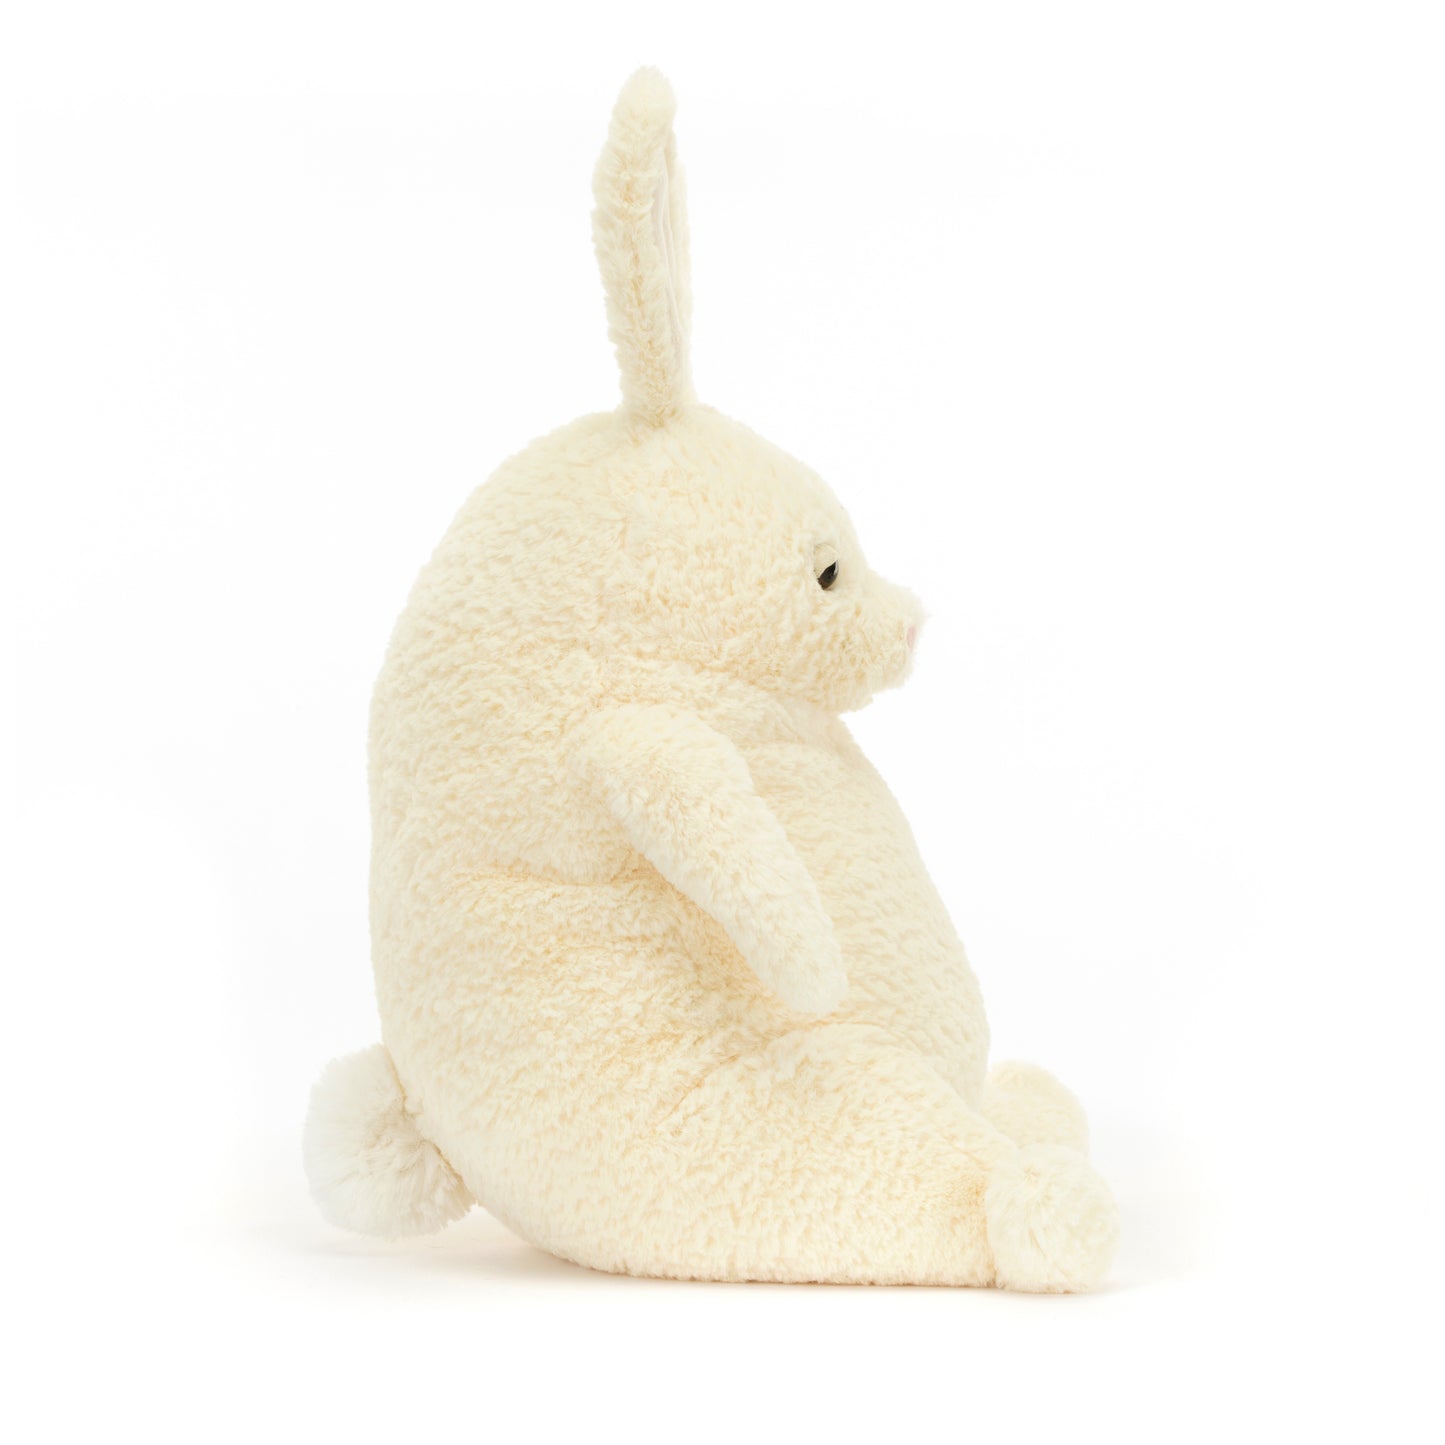 JELLYCAT AMORE BUNNY